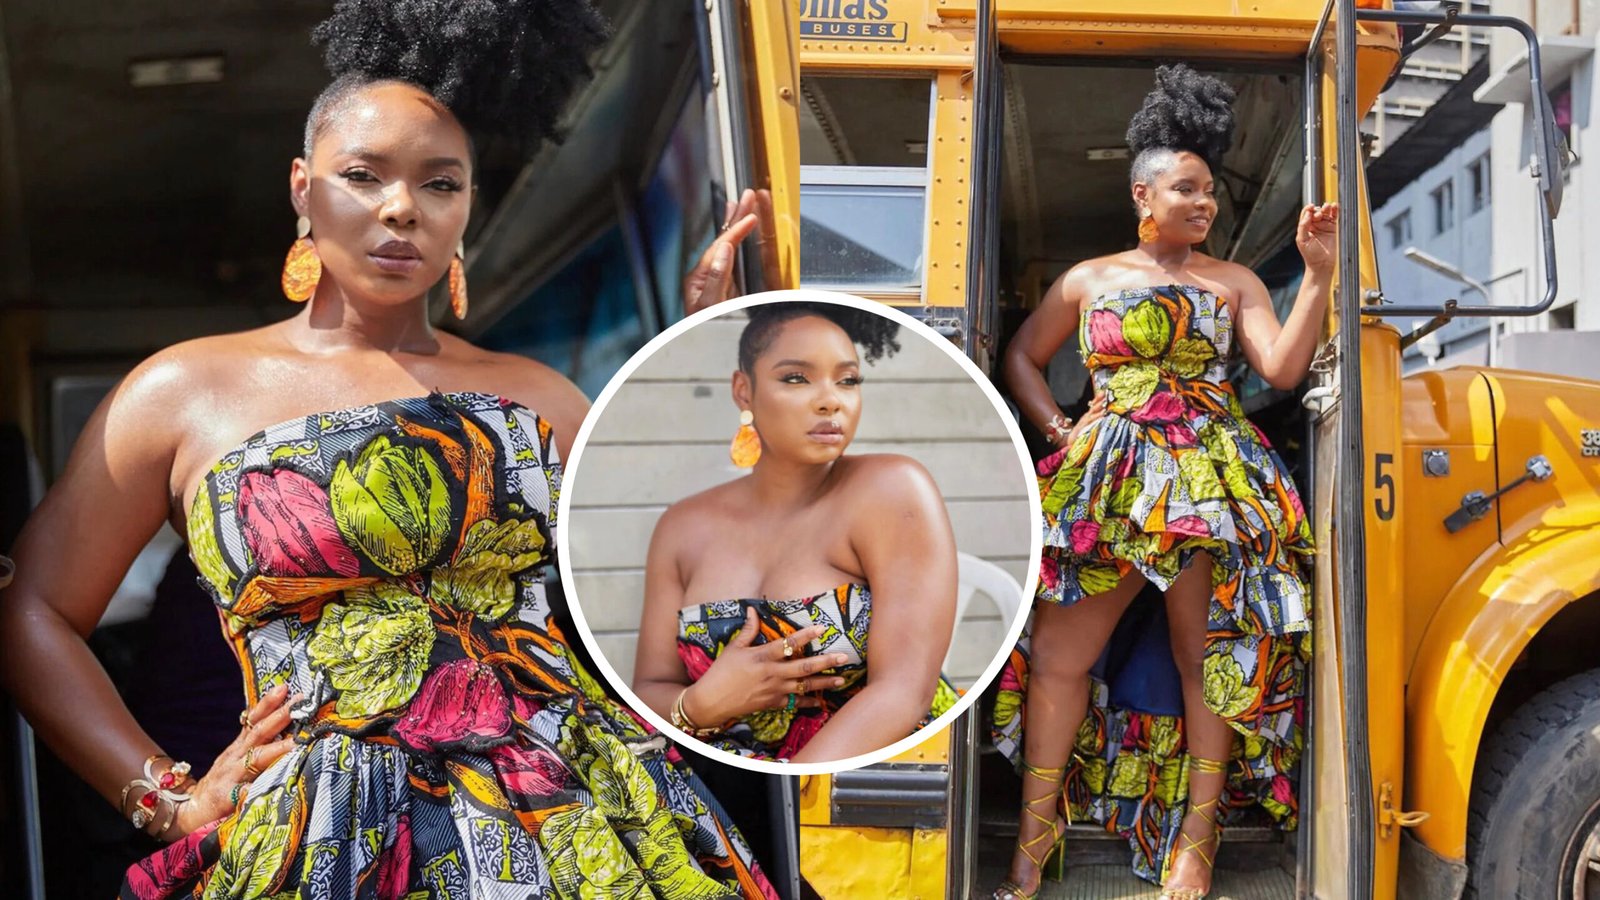 “Proud African Queen” – Yemi Alade gives pressure in nice looking African print (See Photos)